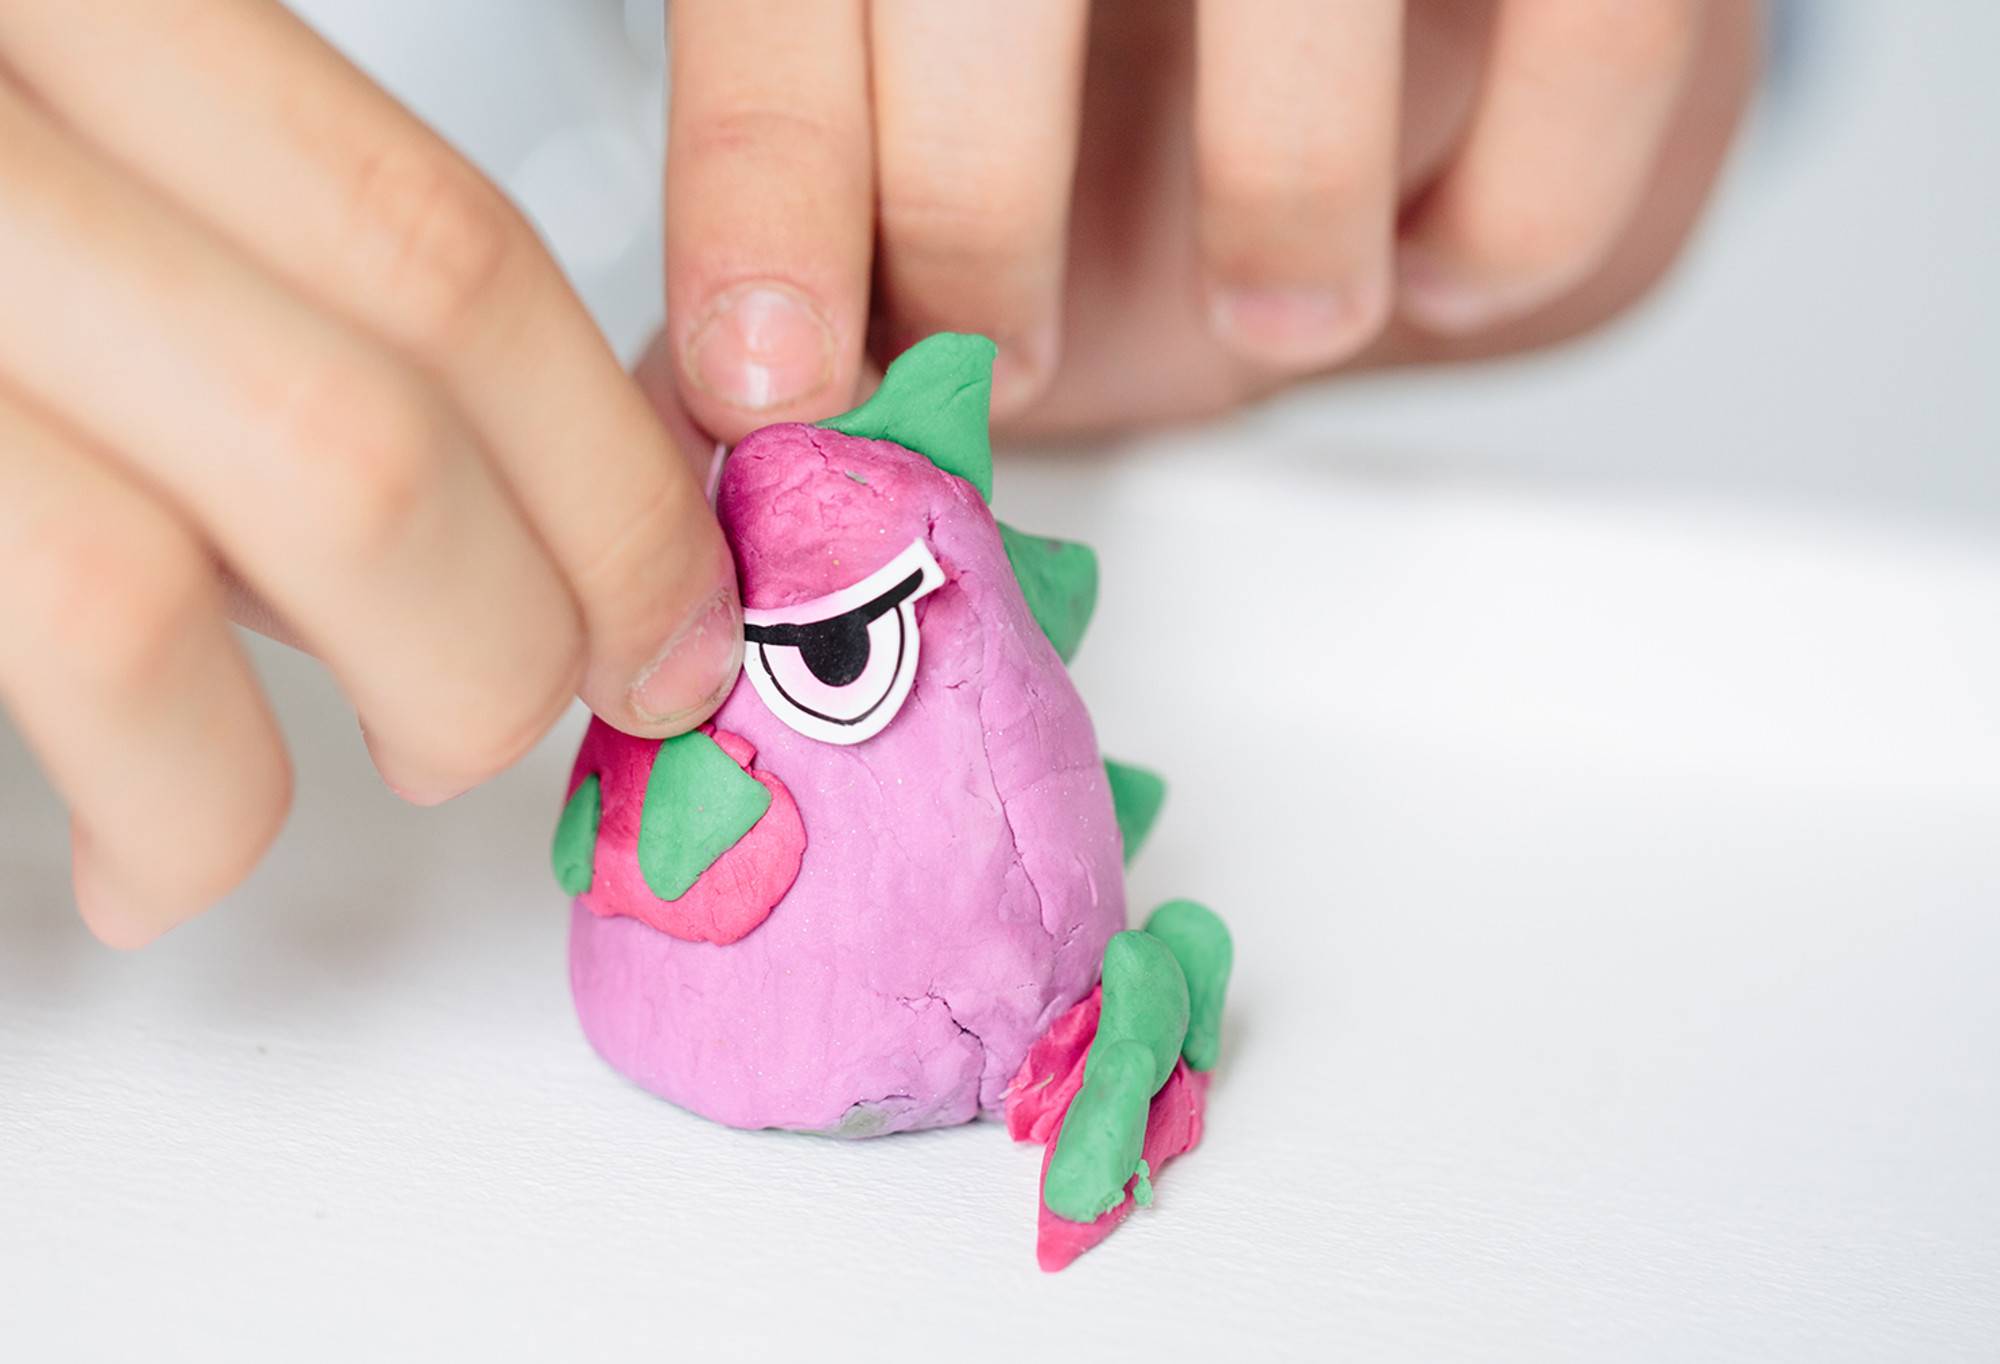 A pinky purple monster with green spikes along its back has been created out of Monsters & Aliens Fun, complete with paper eyes.